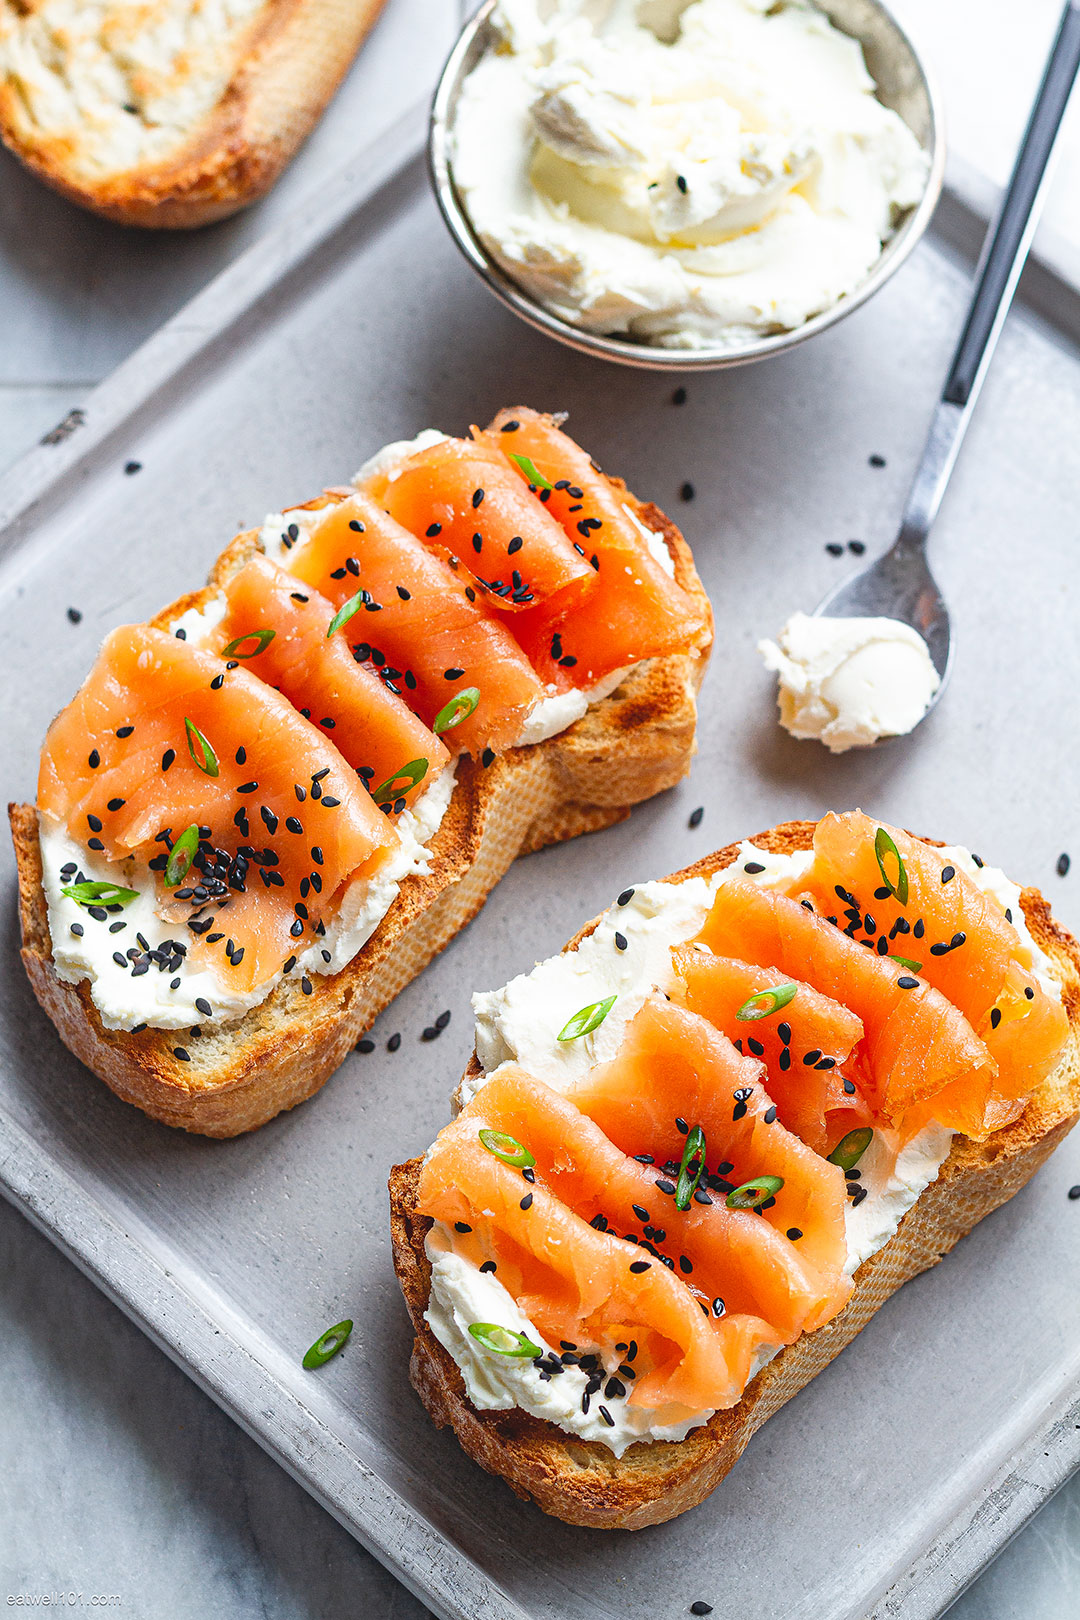  Whipped Cream Cheese Toasts with Smoked Salmon